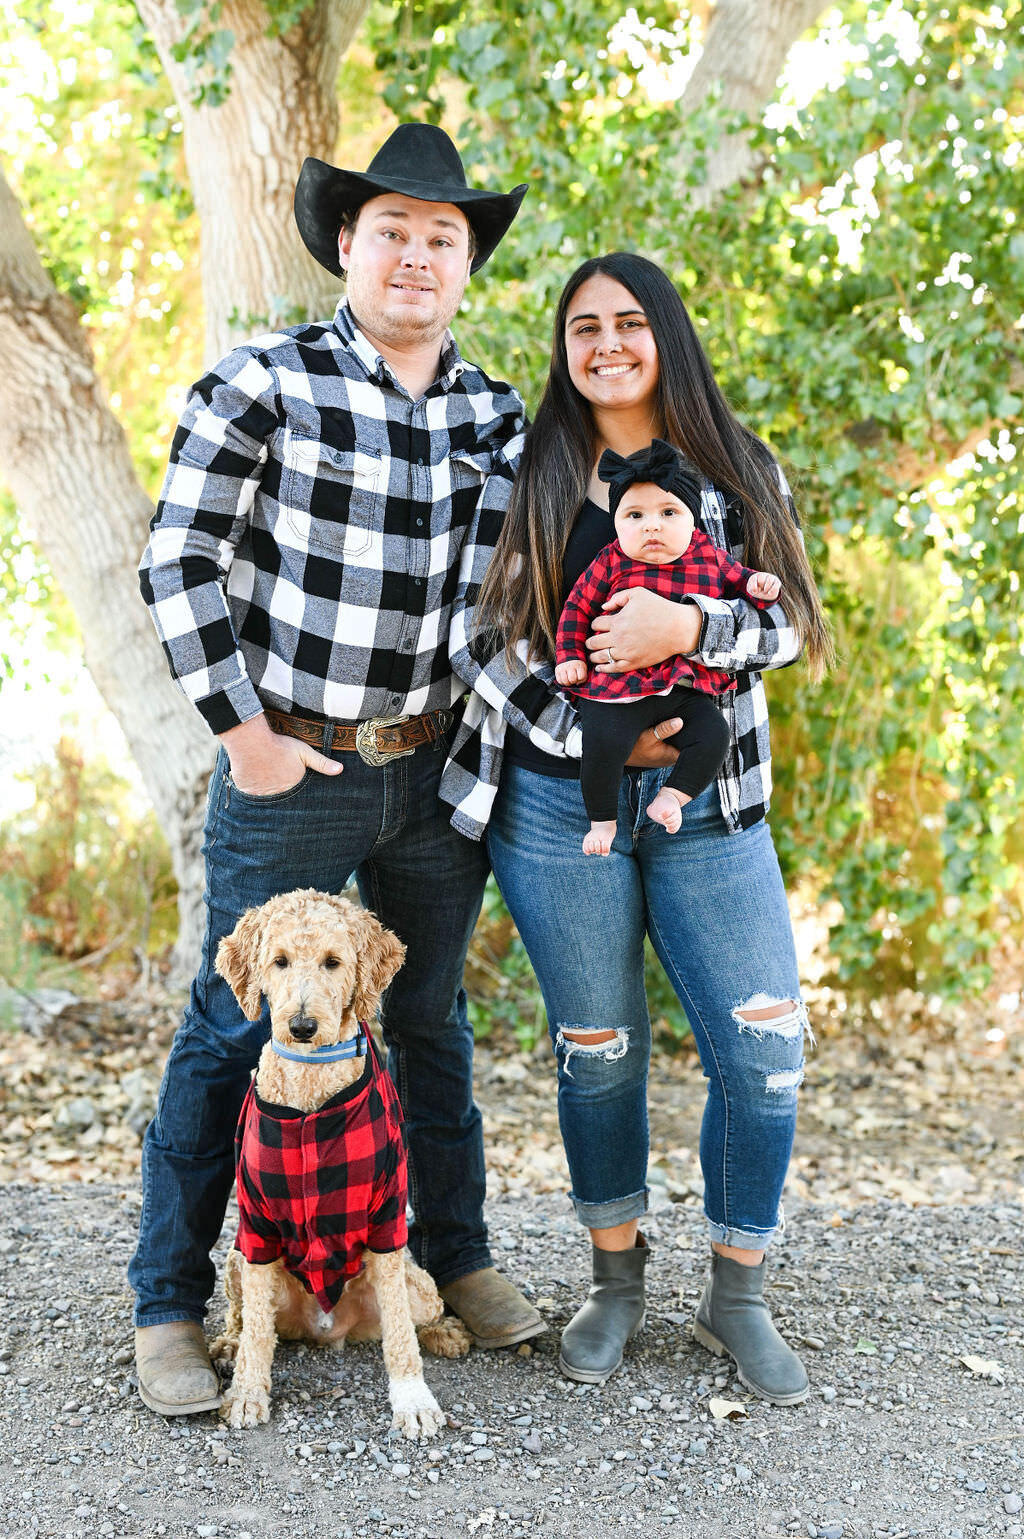 Parents holding a small child in their arms and posing in matching outfits with a dog sitting at their feet.